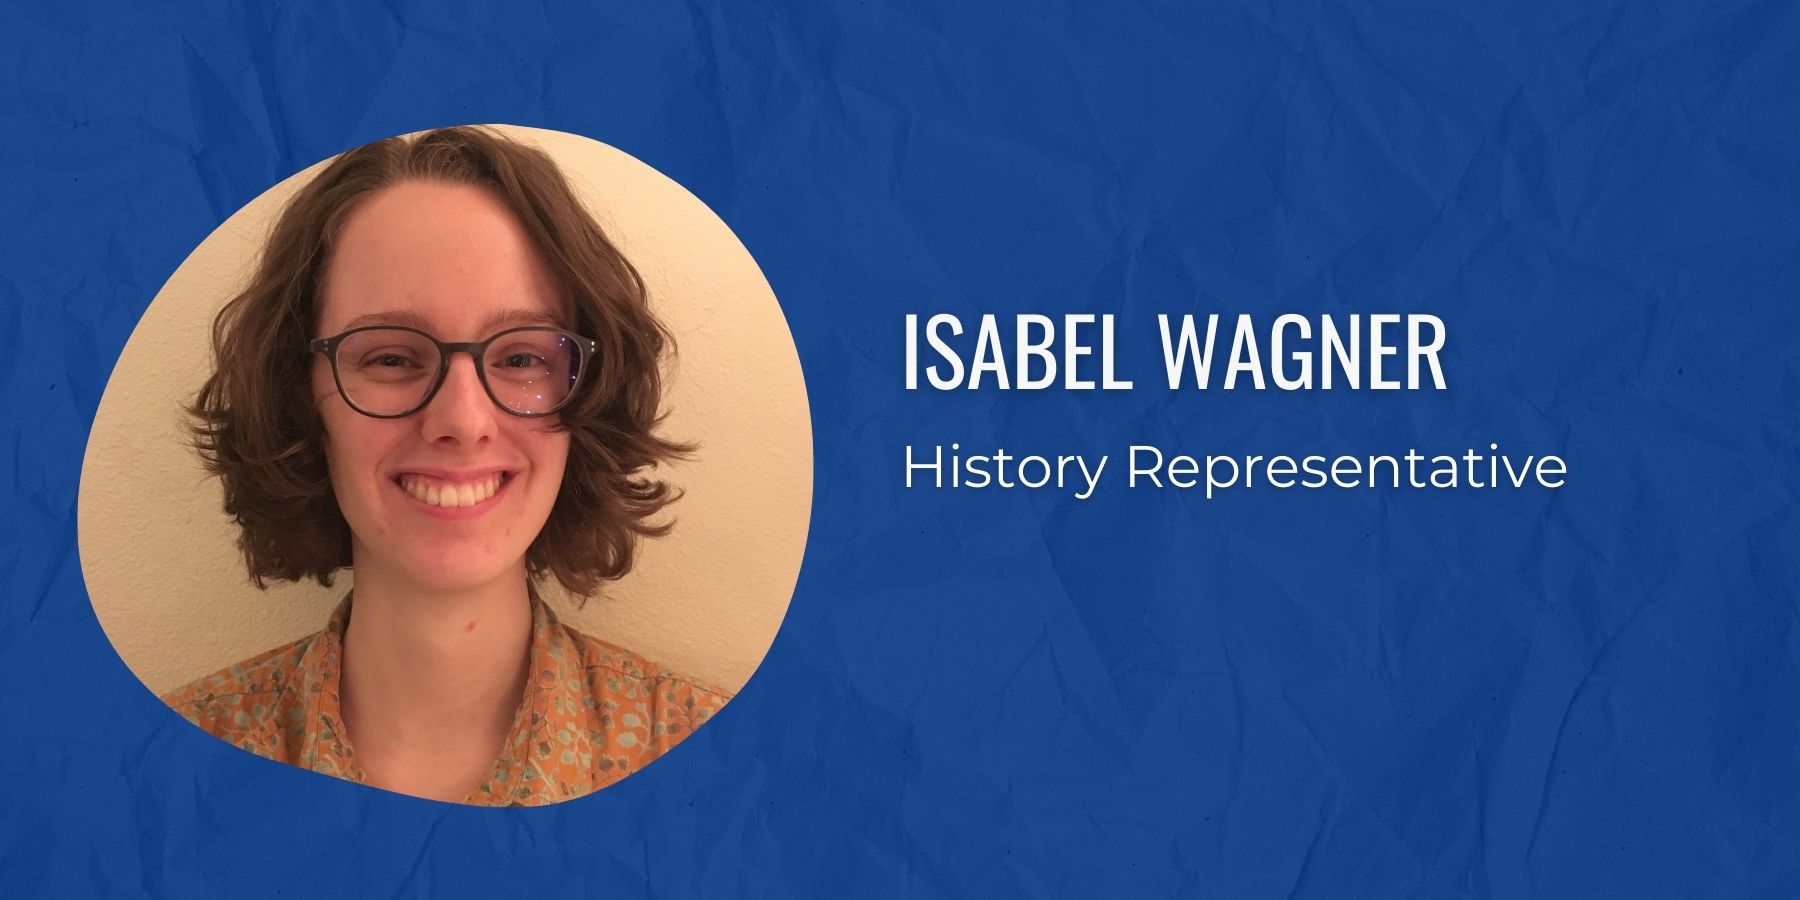 Photo of Isabel Wagner and text: History Representative